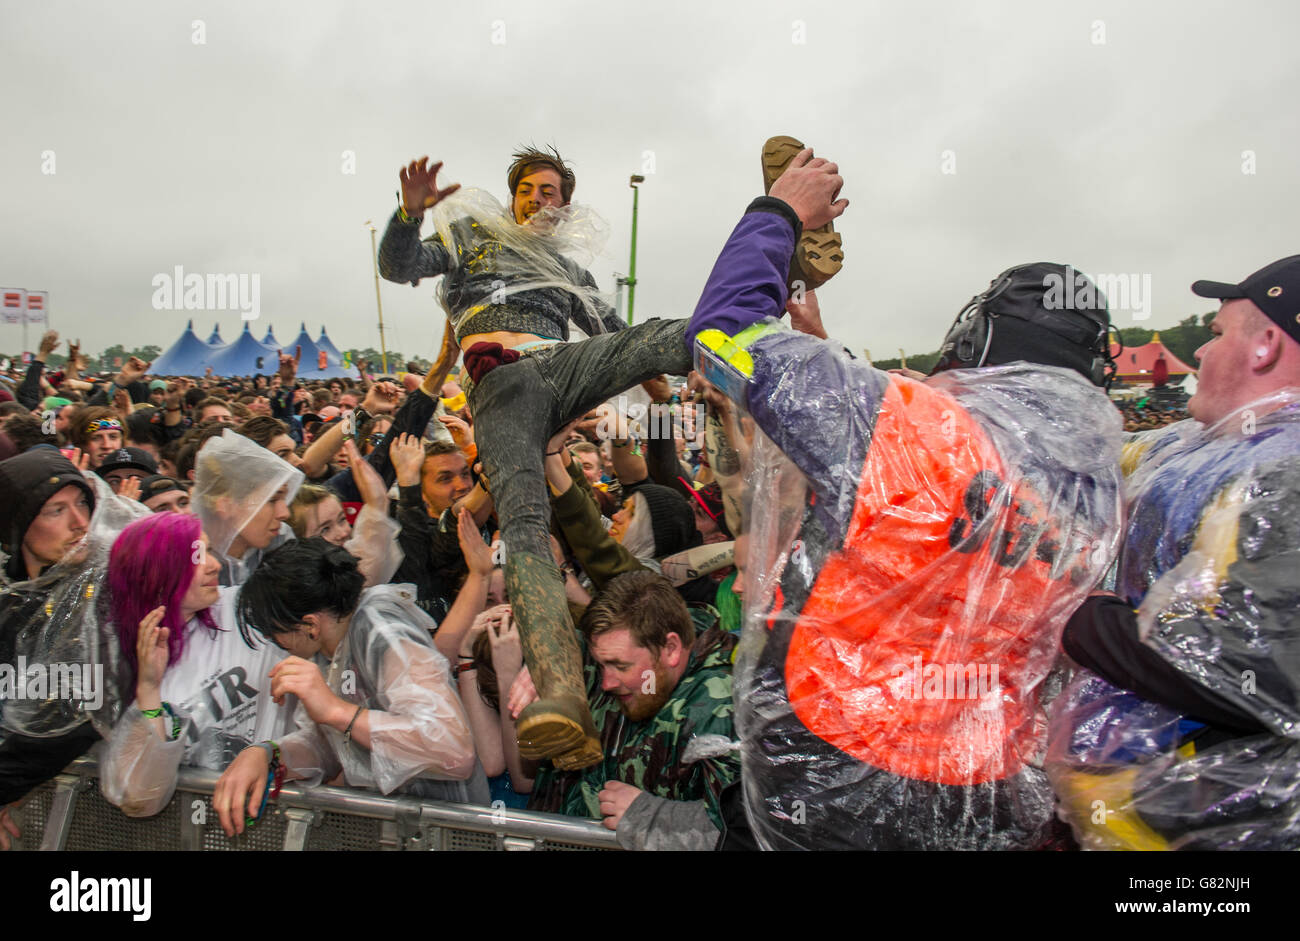 Download Festival 2015 - Day Two - Donington Park. Crowd surfers on day 2 of Download festival on June 13, 2015 in Donington Park, United Kingdom Stock Photo